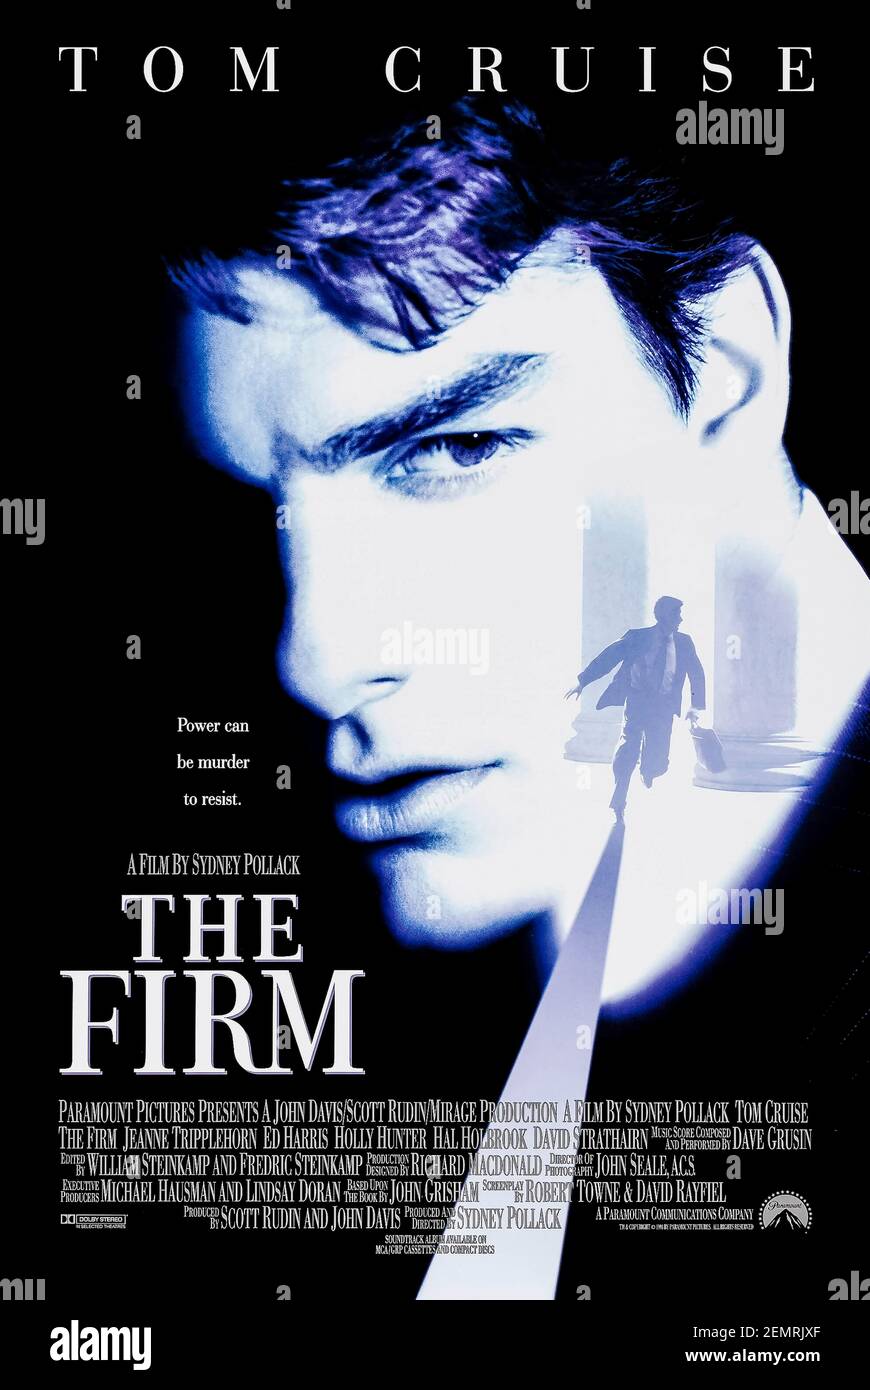 The Firm (1993) directed by Sydney Pollack and starring Tom Cruise, Jeanne Tripplehorn and Gene Hackman. Big screen adaptation of John Grisham's best selling novel about a young lawyer joins a prestigious law firm only to discover that it has a sinister dark side. Stock Photo